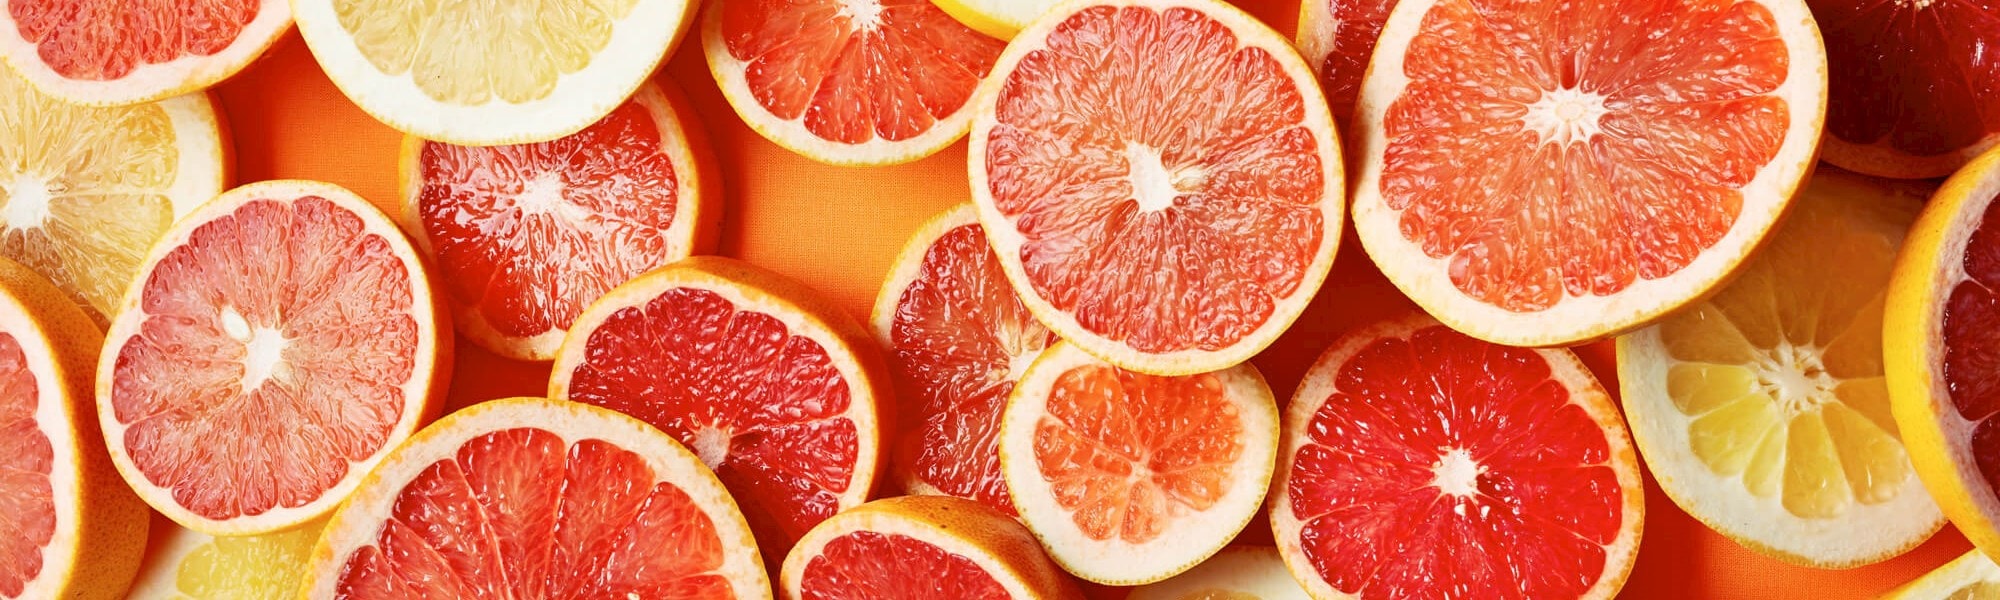 vitamin c benefits for the skin eat your veg to get glowing article